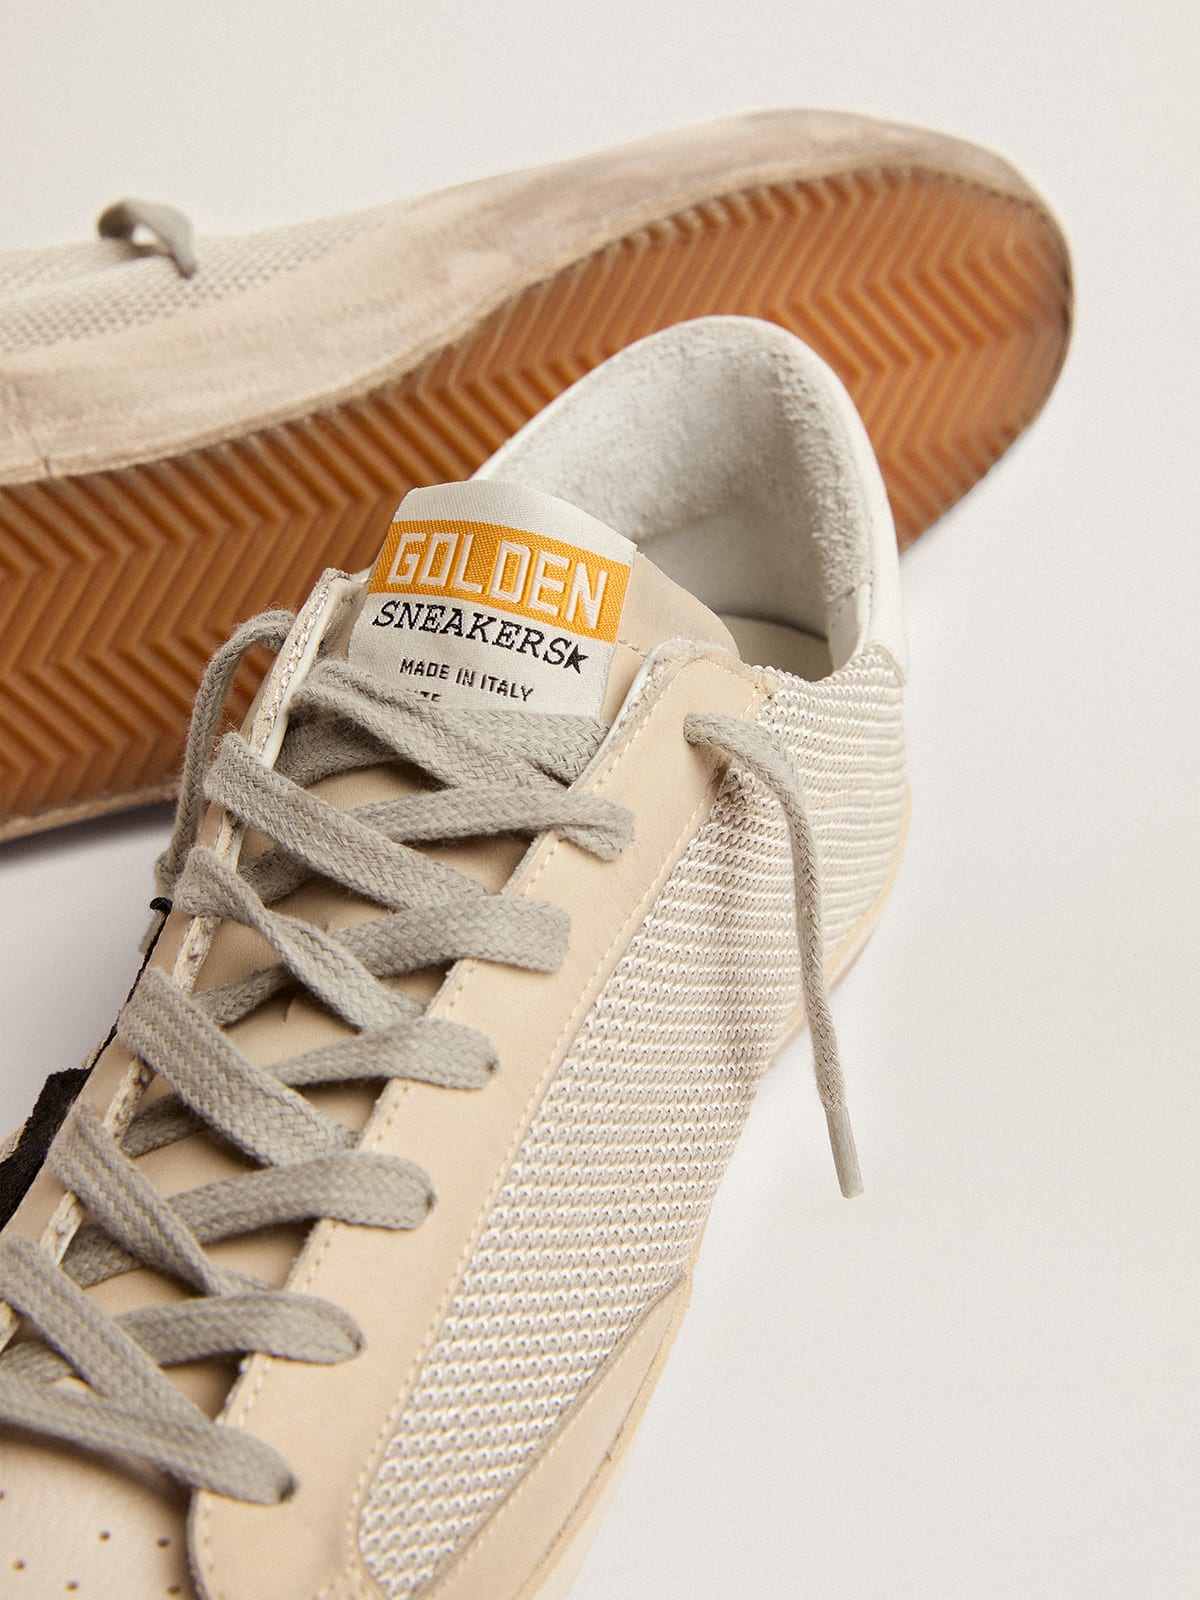 Men's Super-Star sneakers in leather with mesh insert | Golden Goose